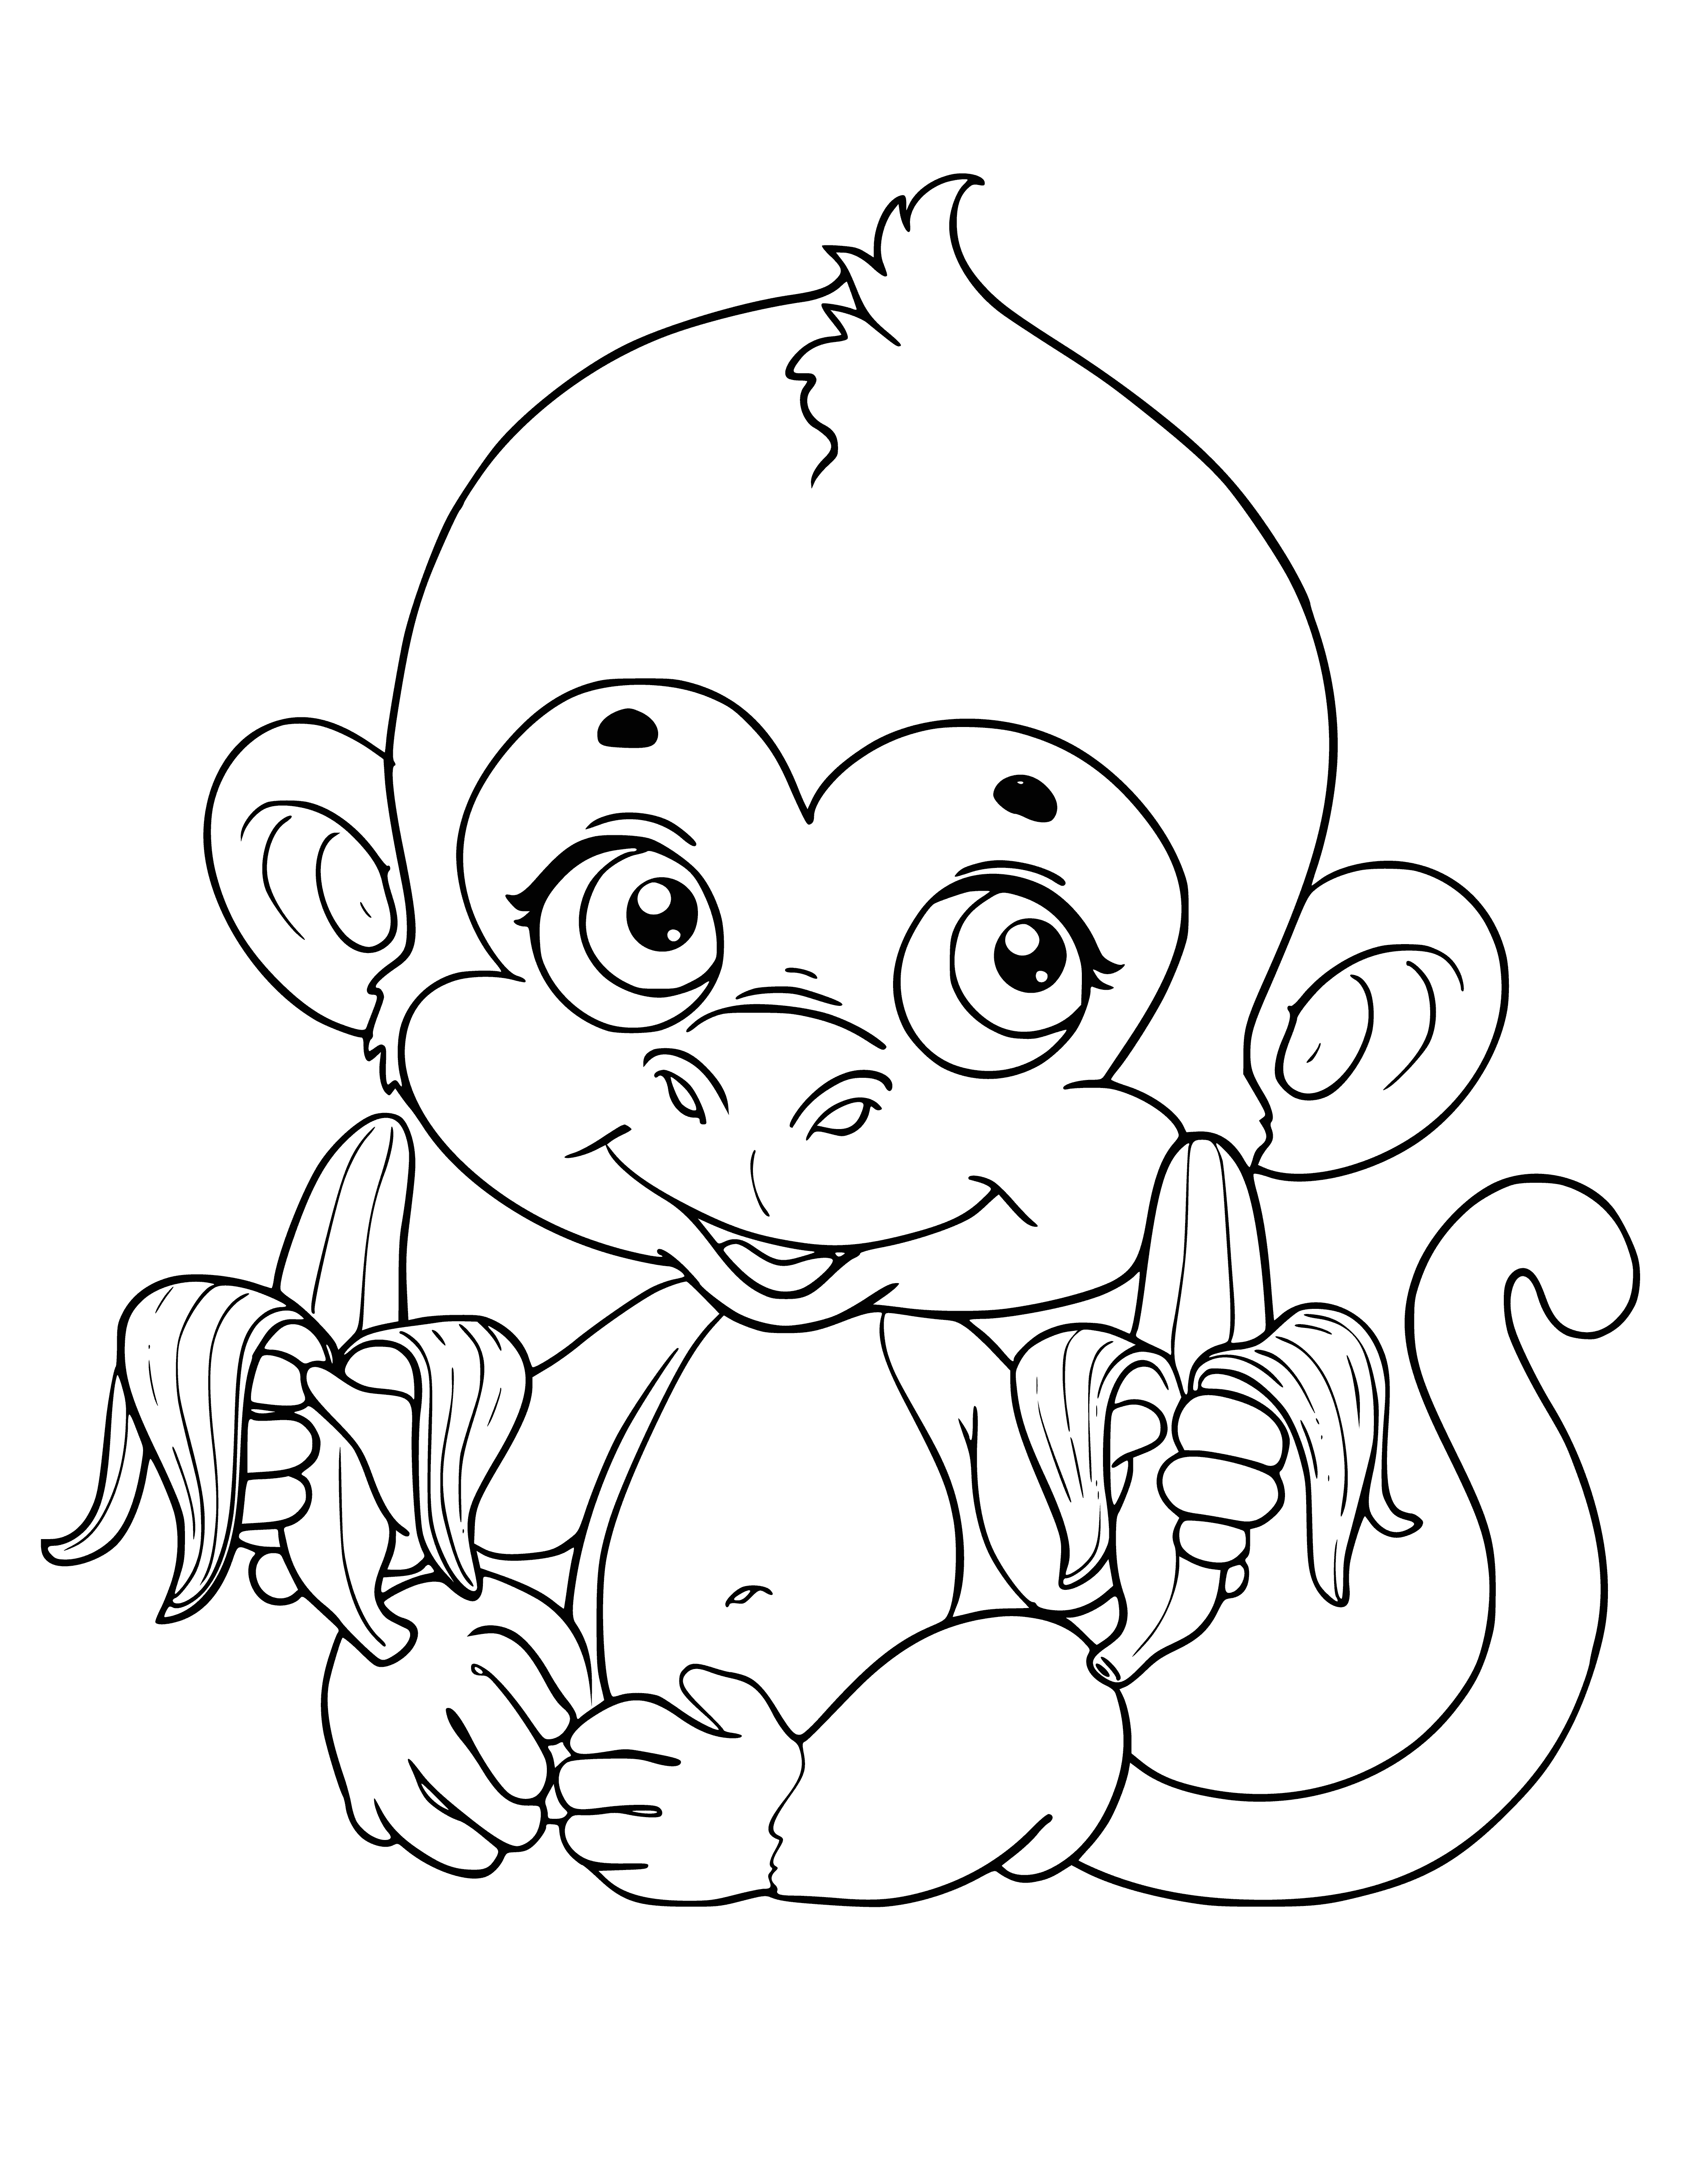 Monkey with bananas coloring page